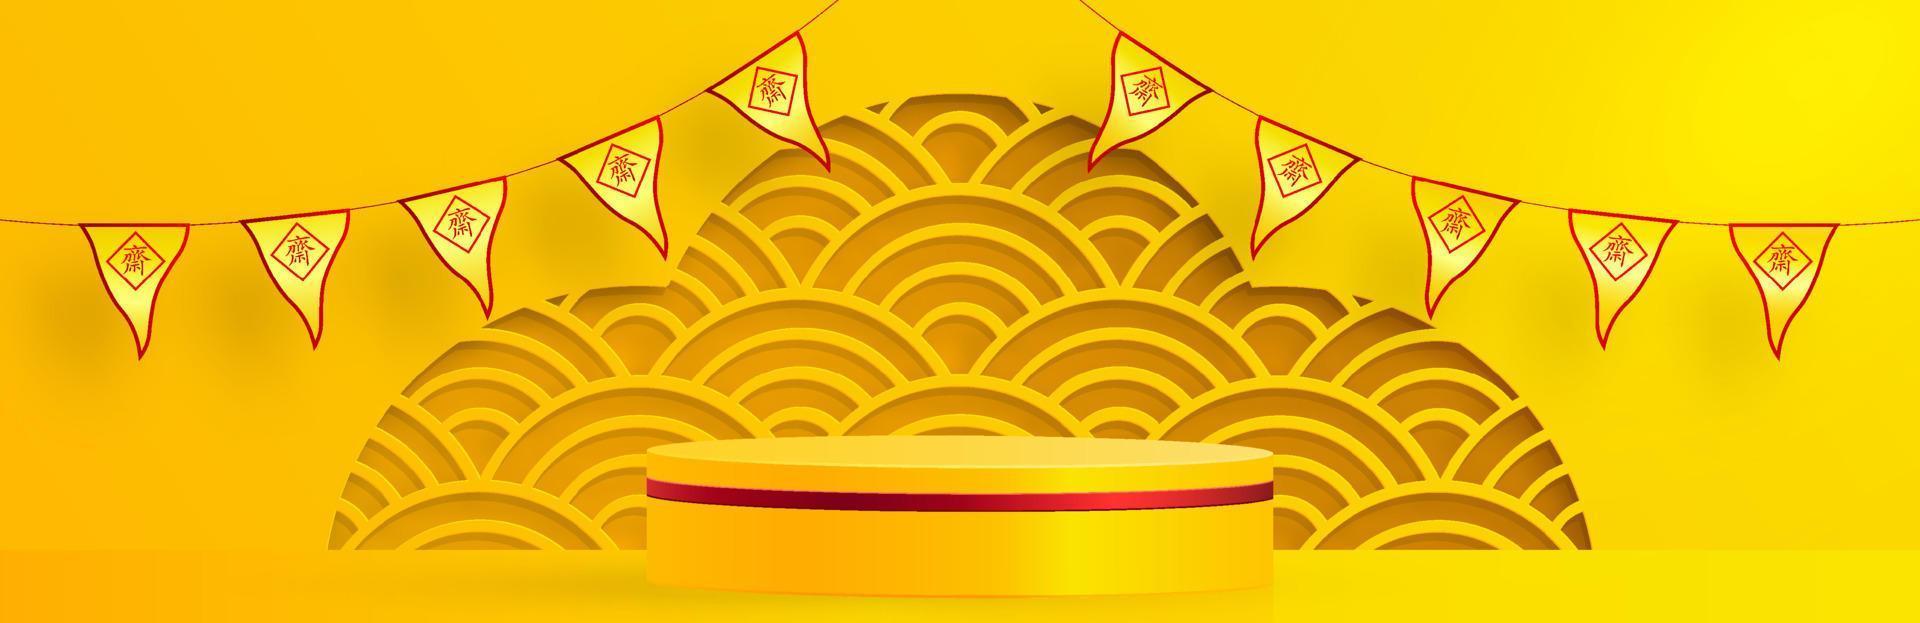 Podium round stage for Chinese vegetarian festival with asian elements vector